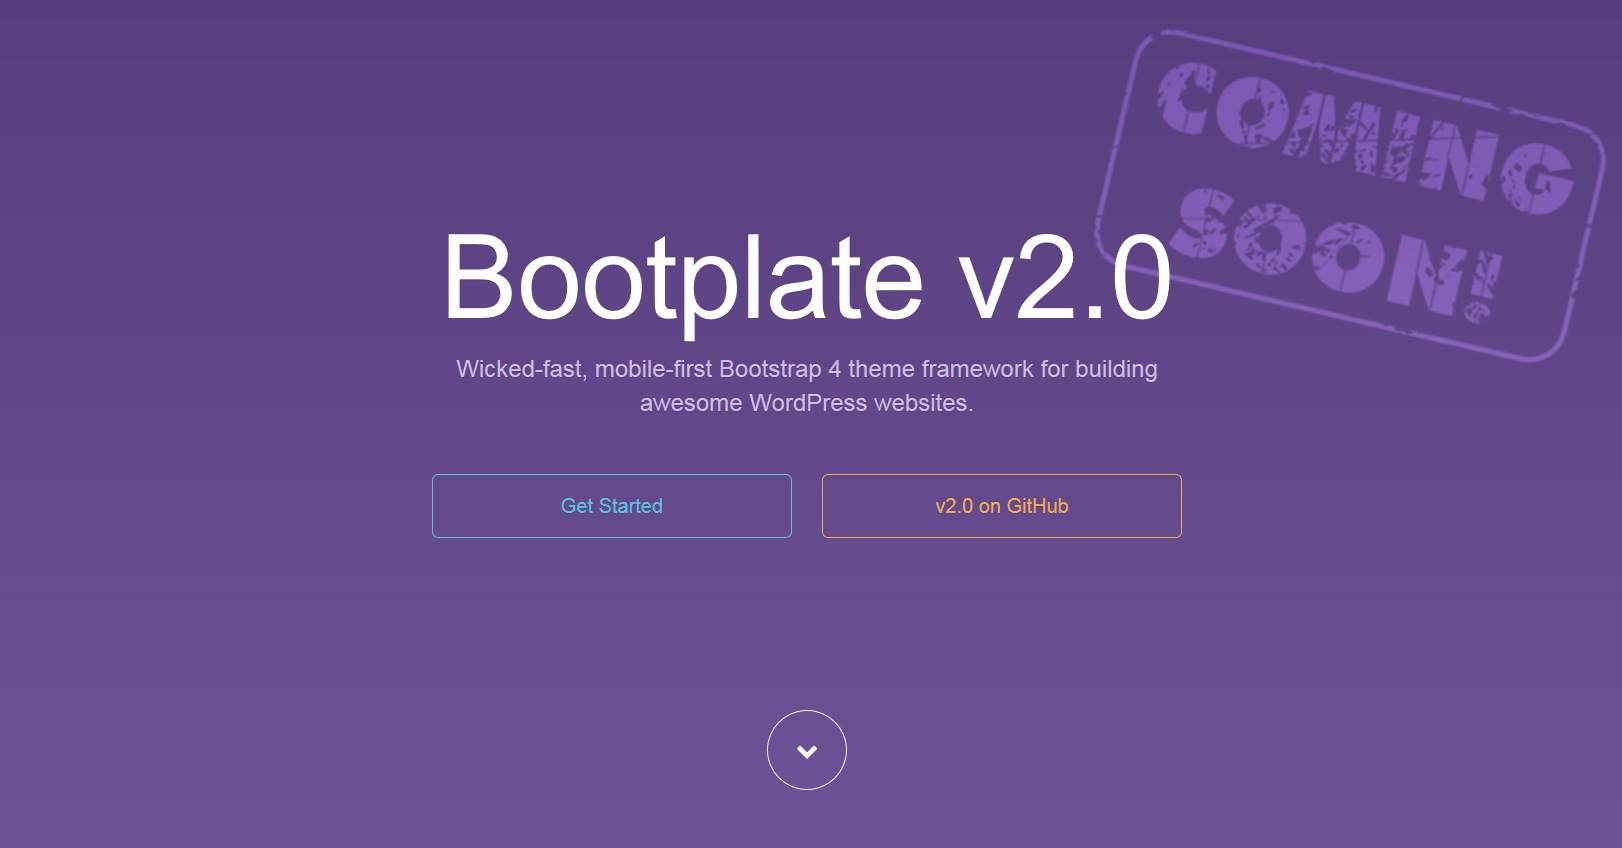 The Future of Bootplate